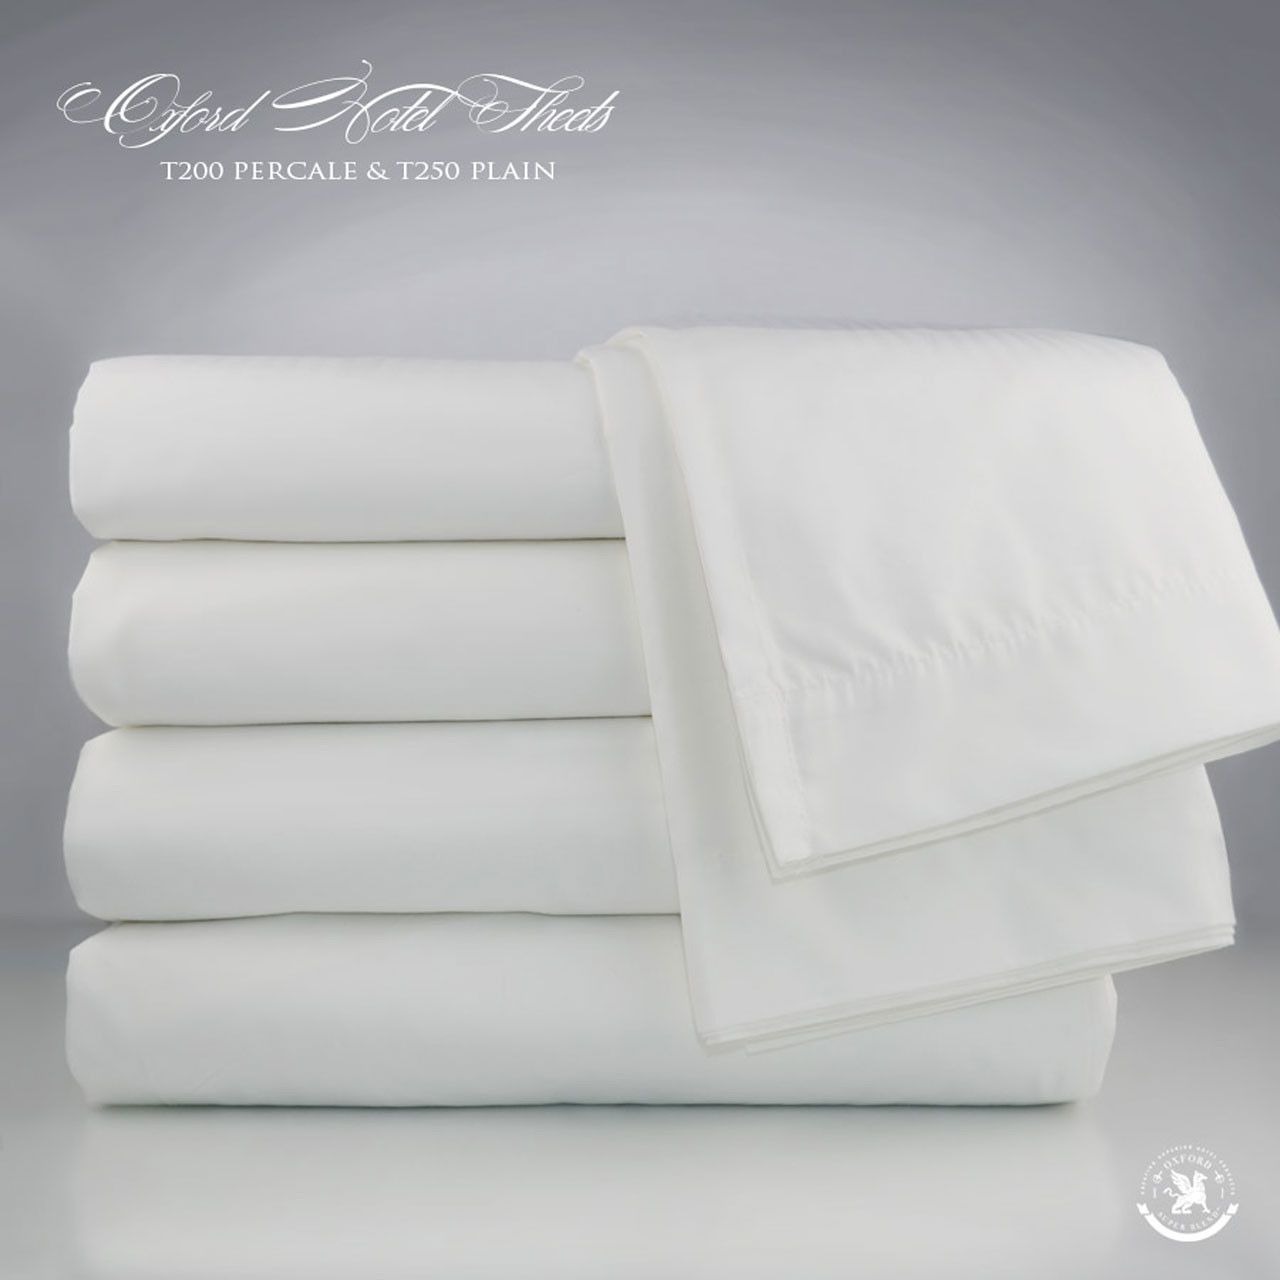 Oxford Superblend T-250 Hotel Sheets Questions & Answers